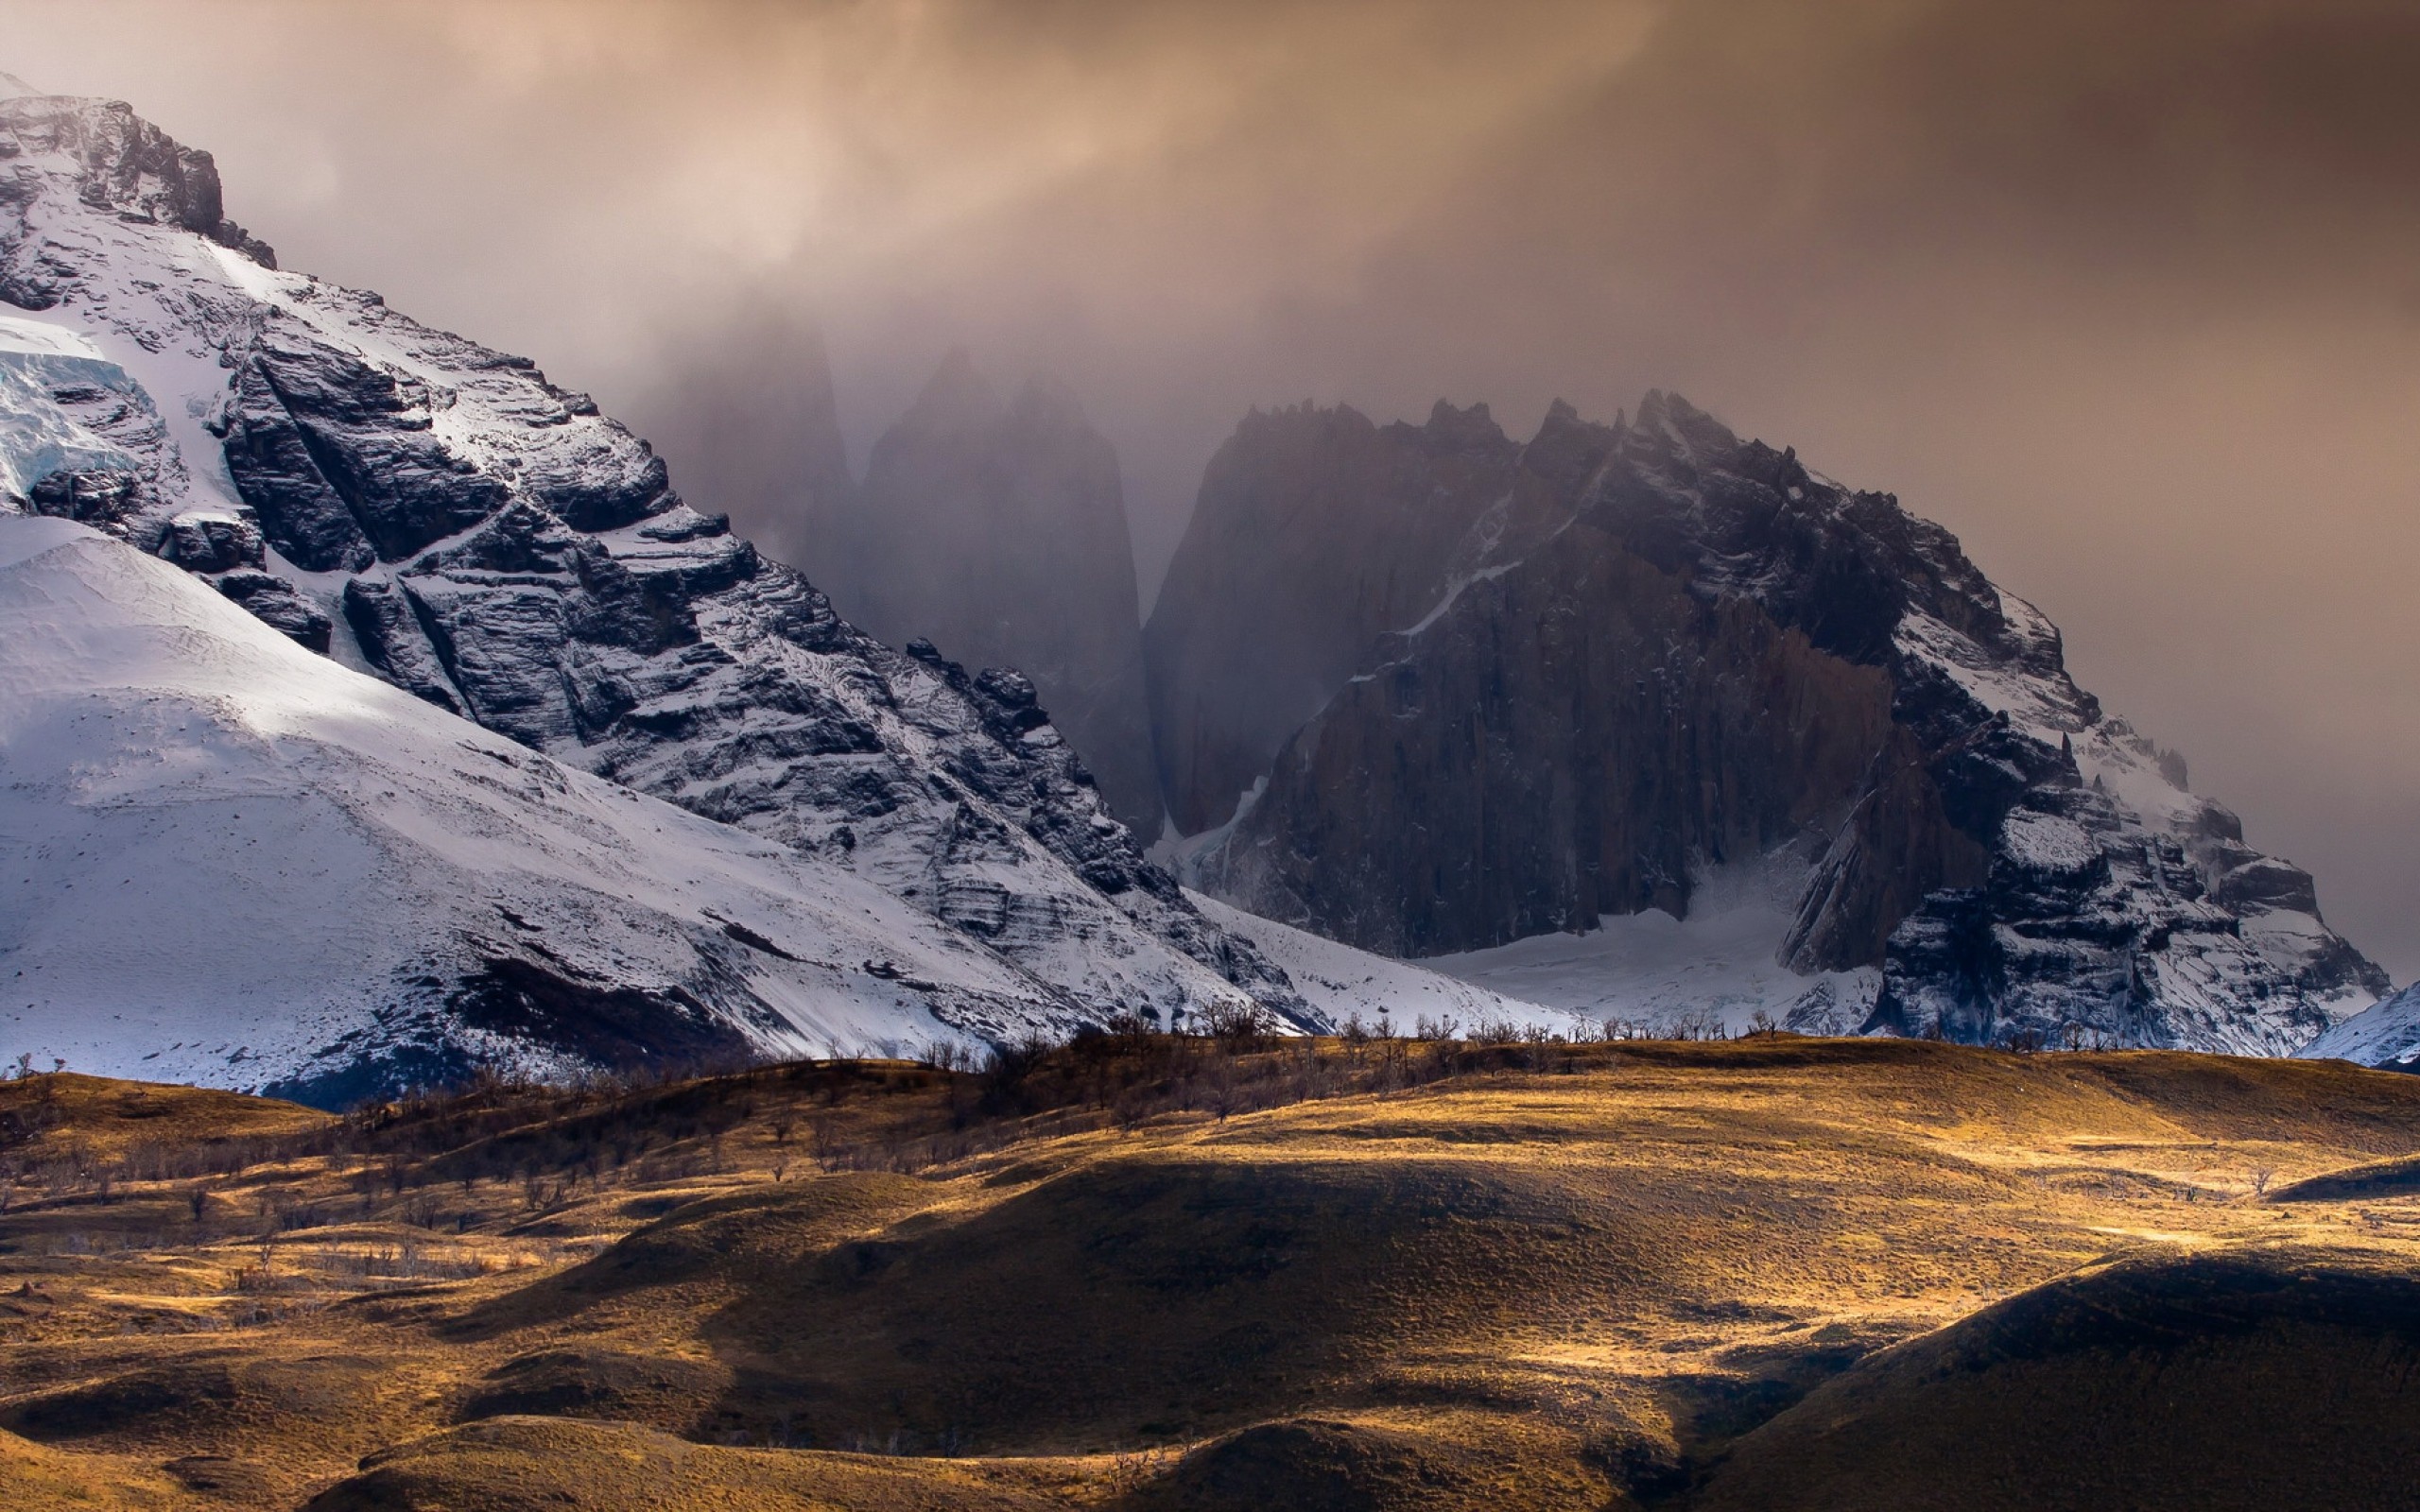 General 2560x1600 nature landscape mountains Chile Andes  hills winter snow mist sunlight trees rocks